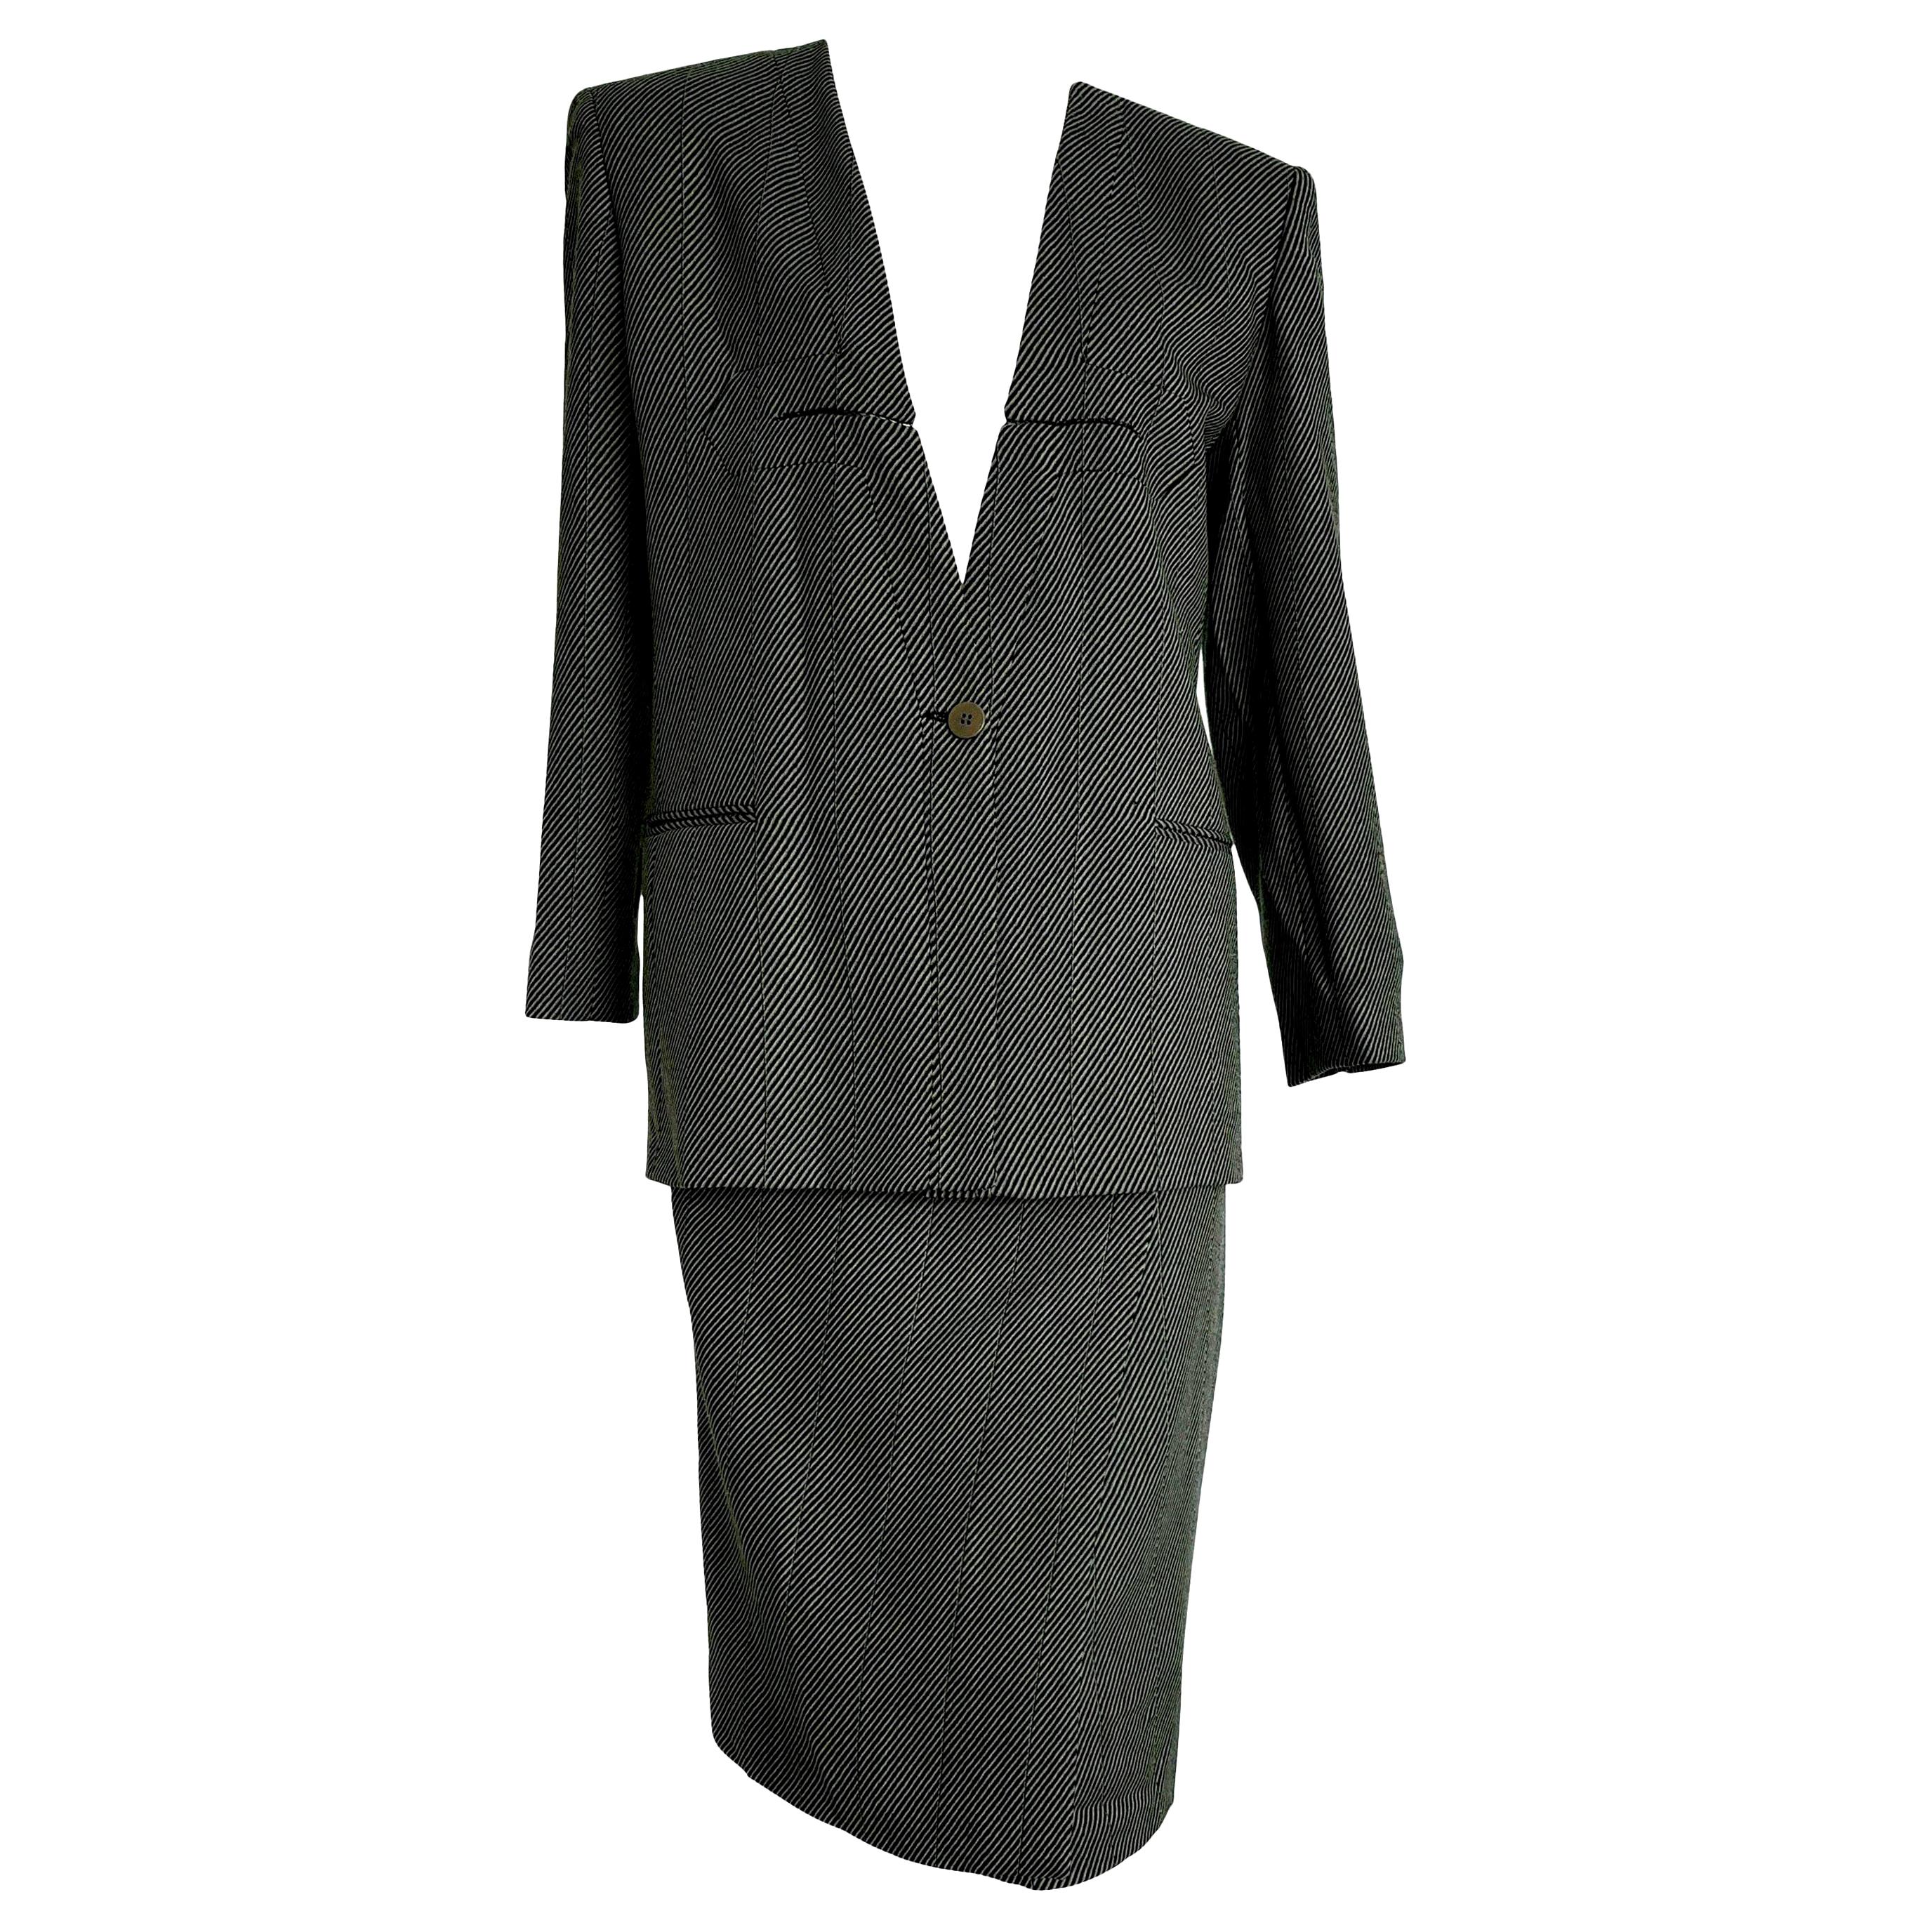 Giorgio ARMANI "New" Dark and Light Gray Lines Wool Skirt Suit - Unworn For Sale